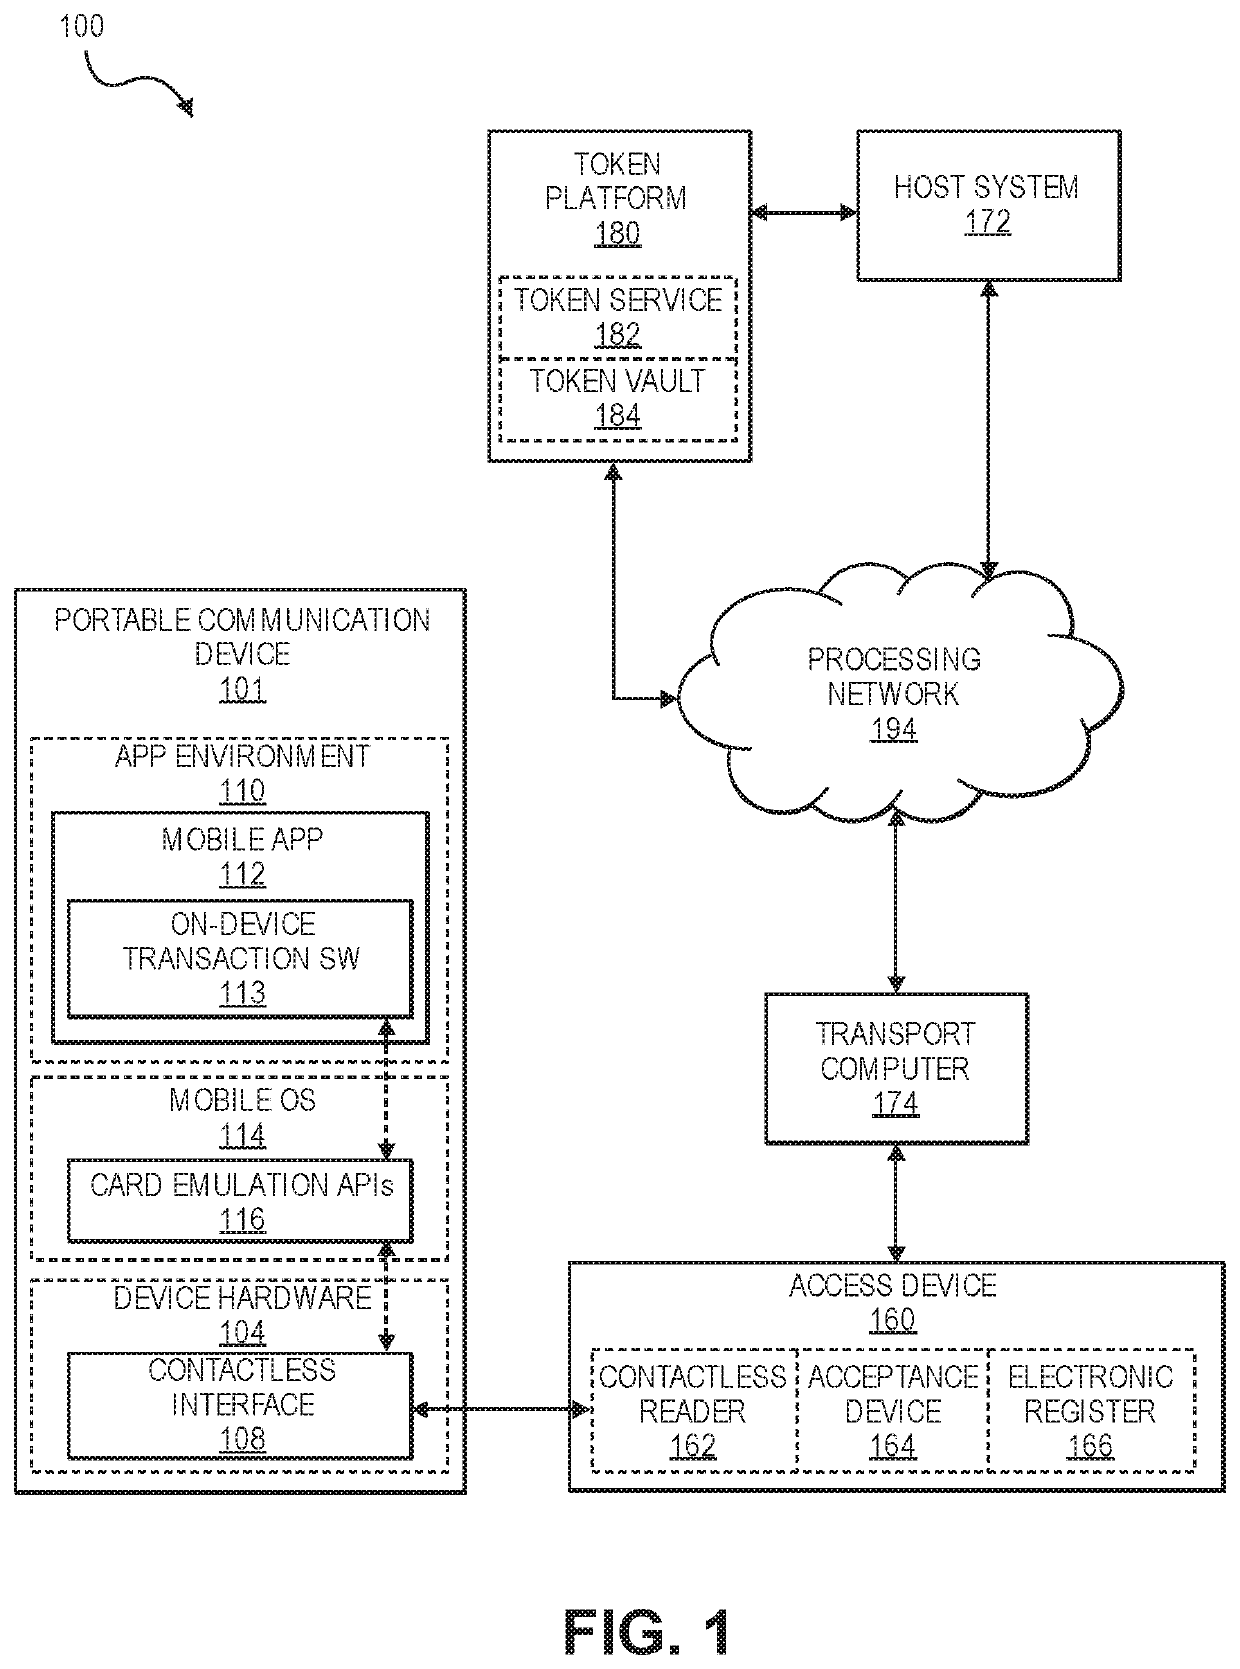 Encryption key exchange process using access device